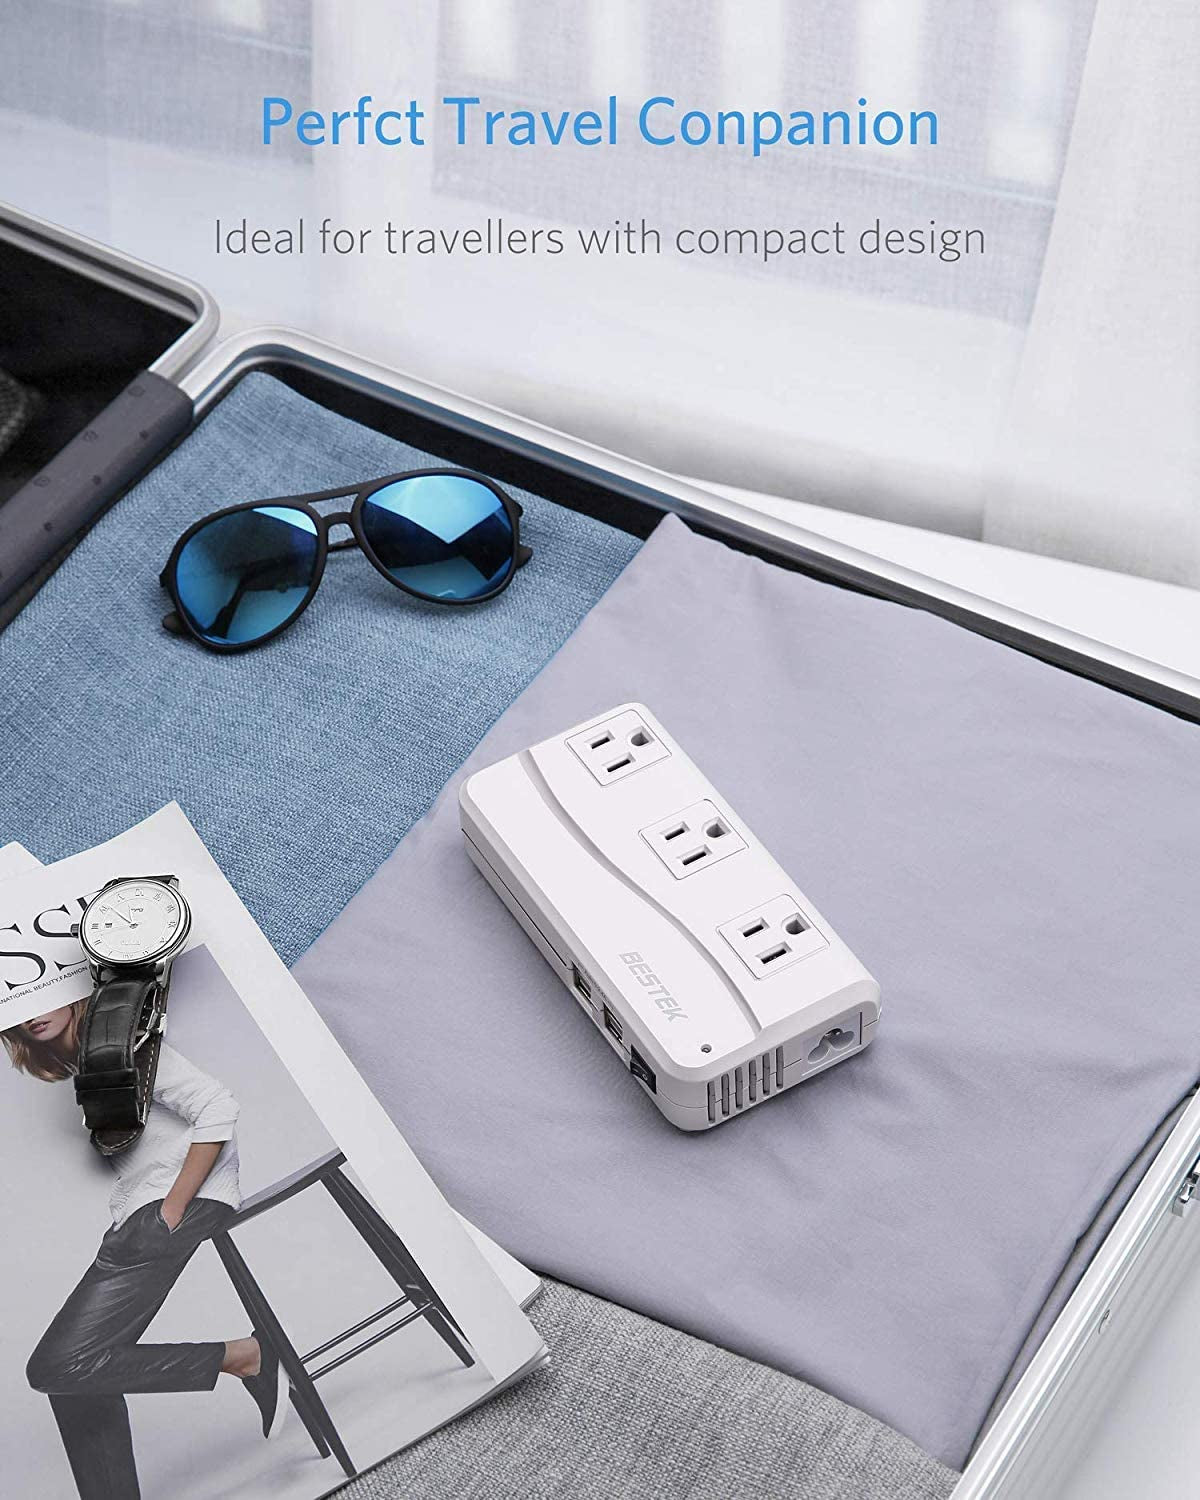 Universal Travel Adapter 100-220V to 110V Voltage Converter 250W with 6A 4-Port USB Charging 3 AC Sockets and Eu/Uk/Au/Us/India Worldwide Plug Adapter (White)